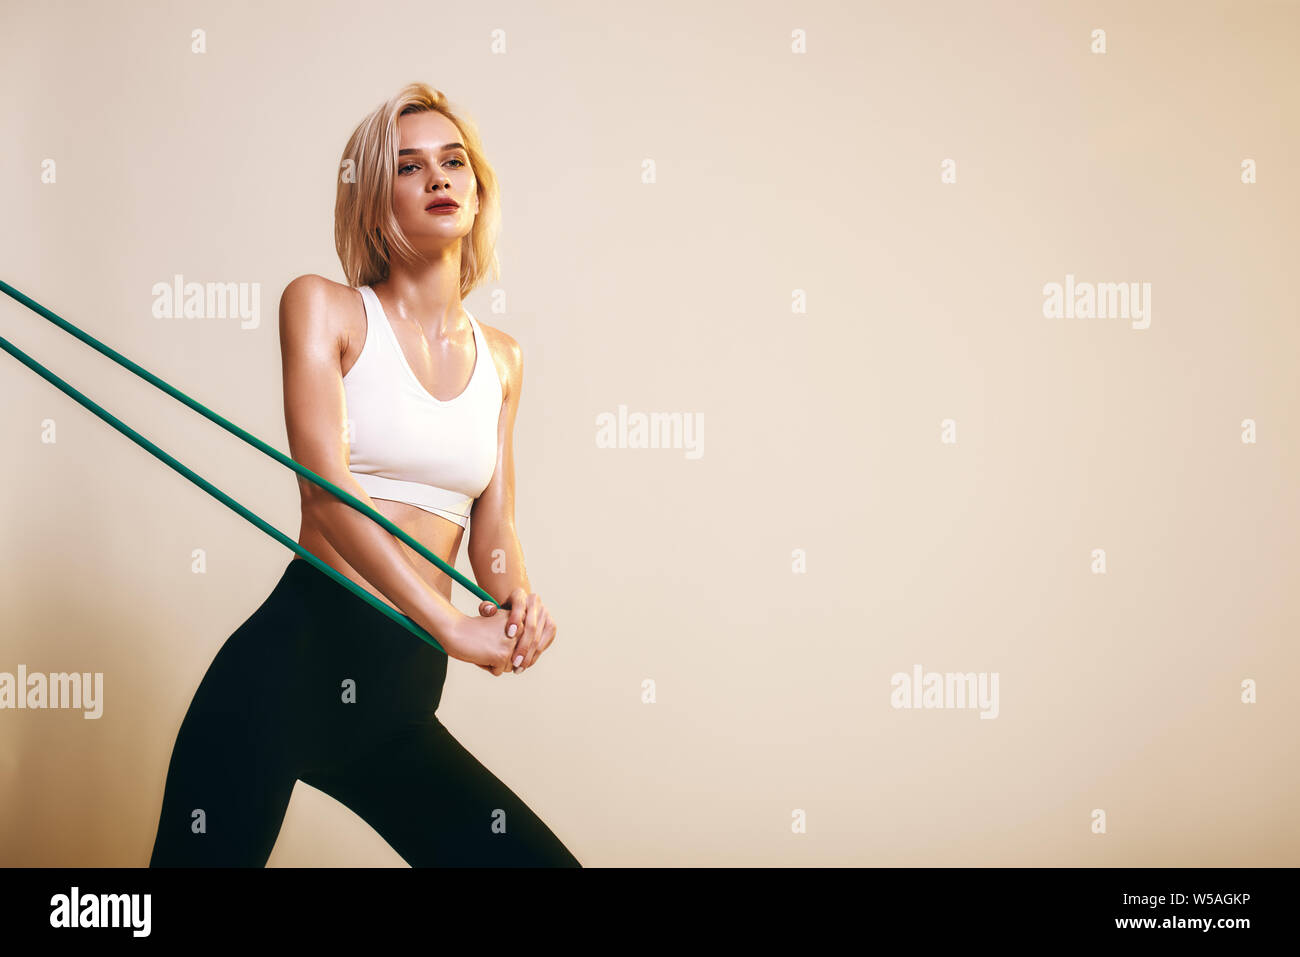 Flexibility. Sporty young woman in white top and black leggings working out with elastic band while standing in studio. Sport concept. Sport equipment Stock Photo